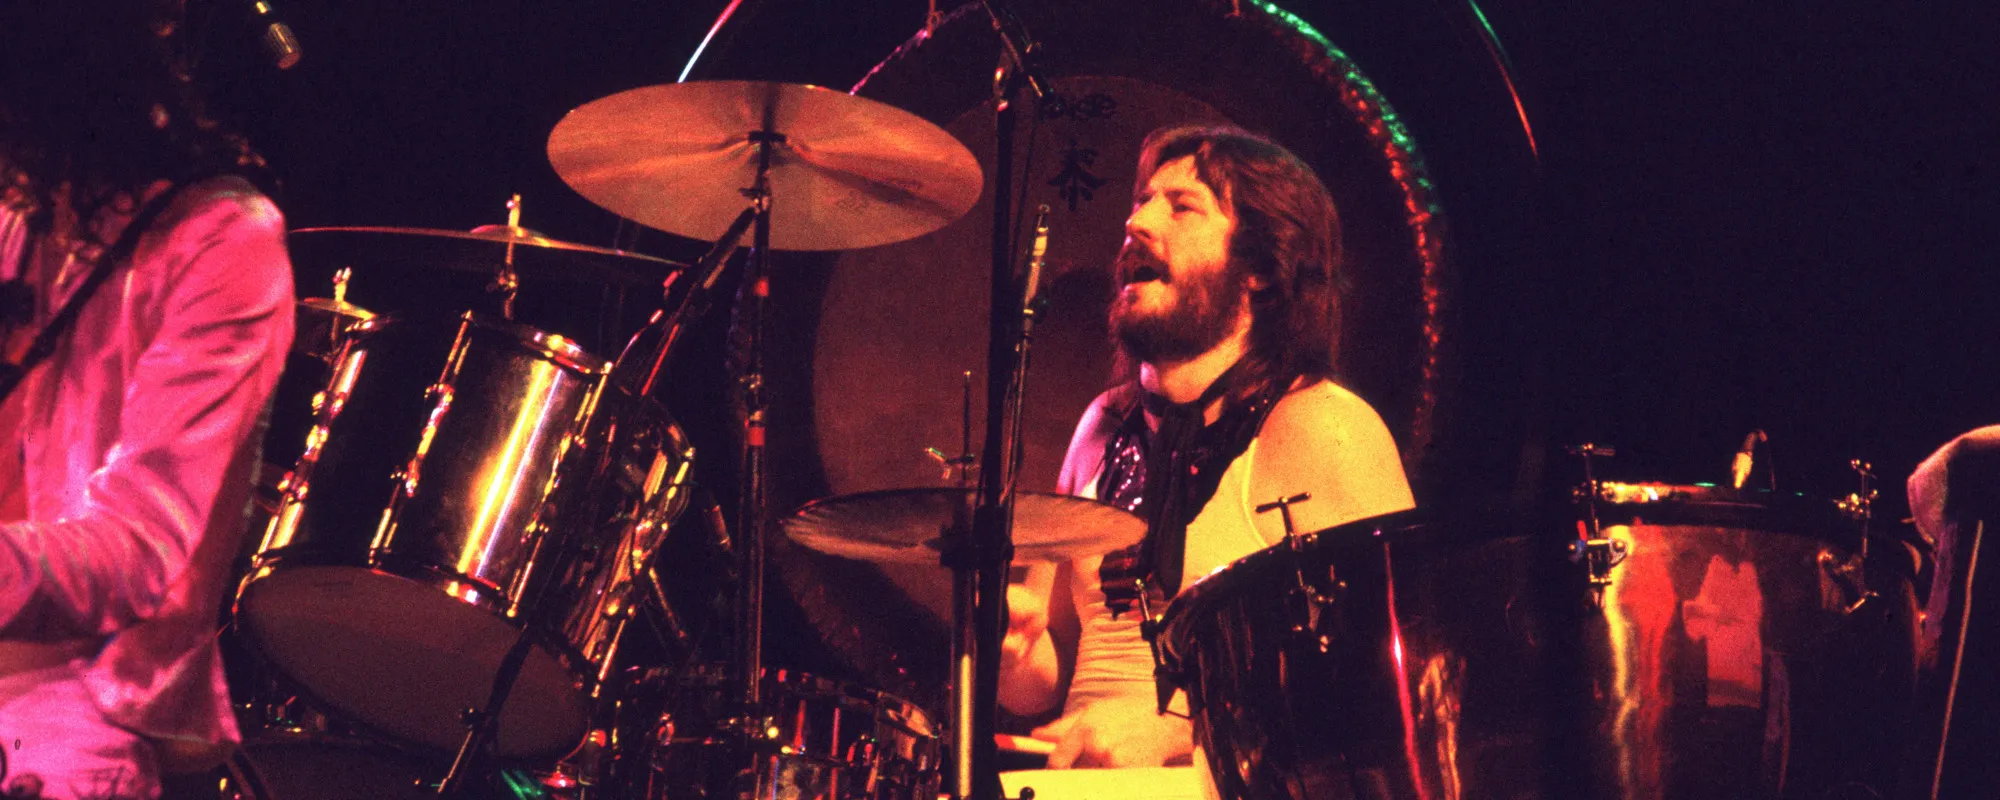 4 Songs You Didn’t Know Drummer John Bonham Wrote for Led Zeppelin